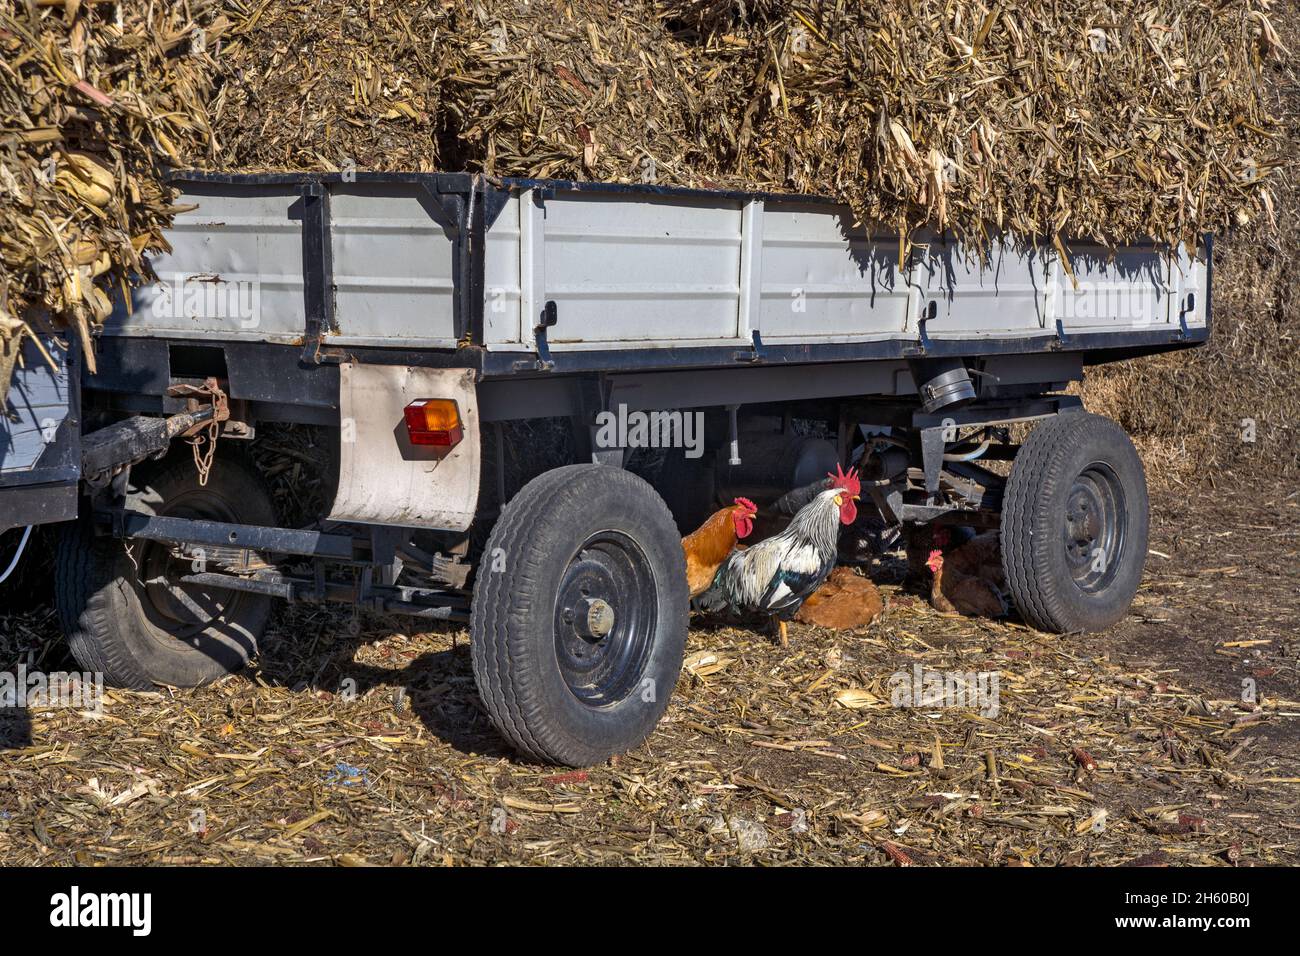 A rural idyll. The rooster and chickens are resting in the shade under a loaded trailer. Stock Photo